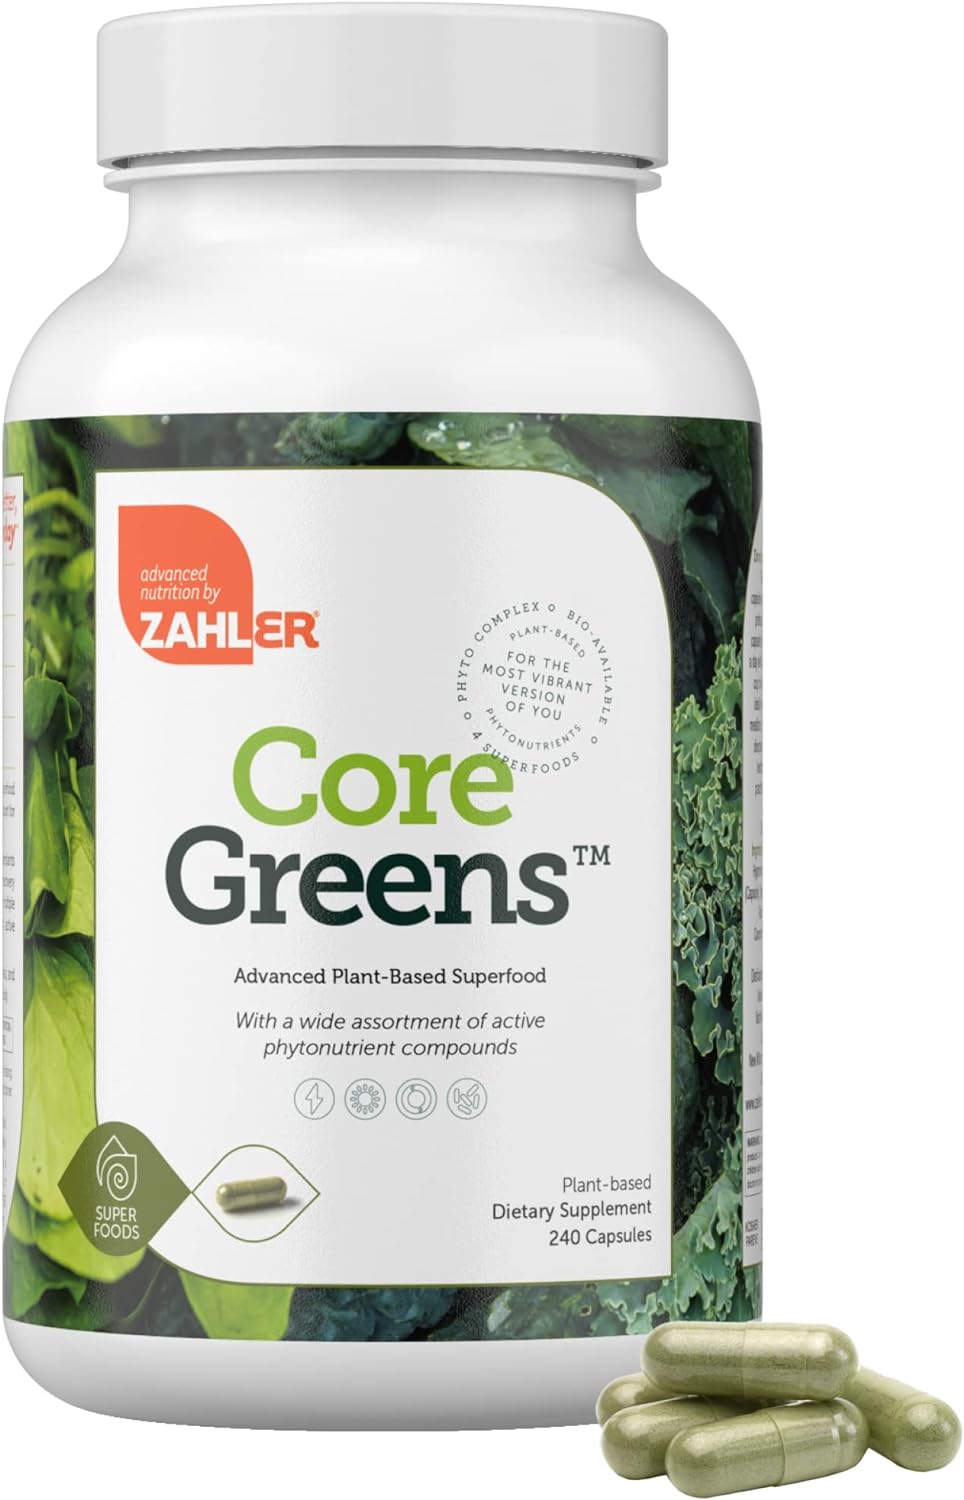 Zahler Core Greens, Superfood Greens Capsules, Super Greens with Spiru